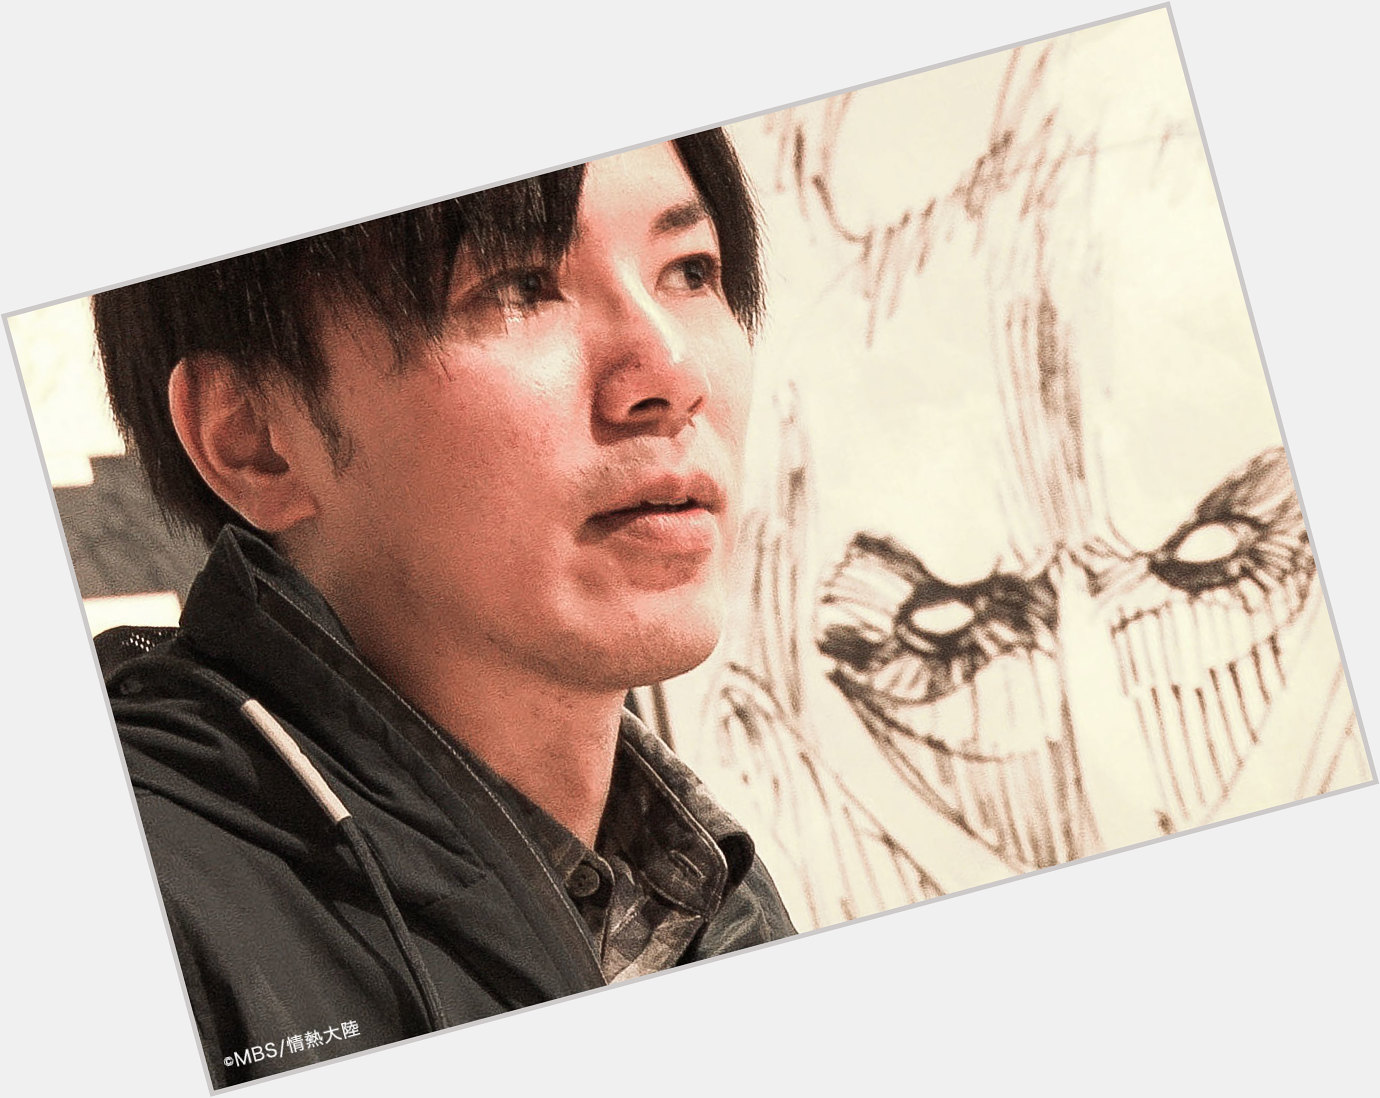 Happy Birthday to the creator of one of the most memorable stories in the Anime world, Hajime Isayama! 